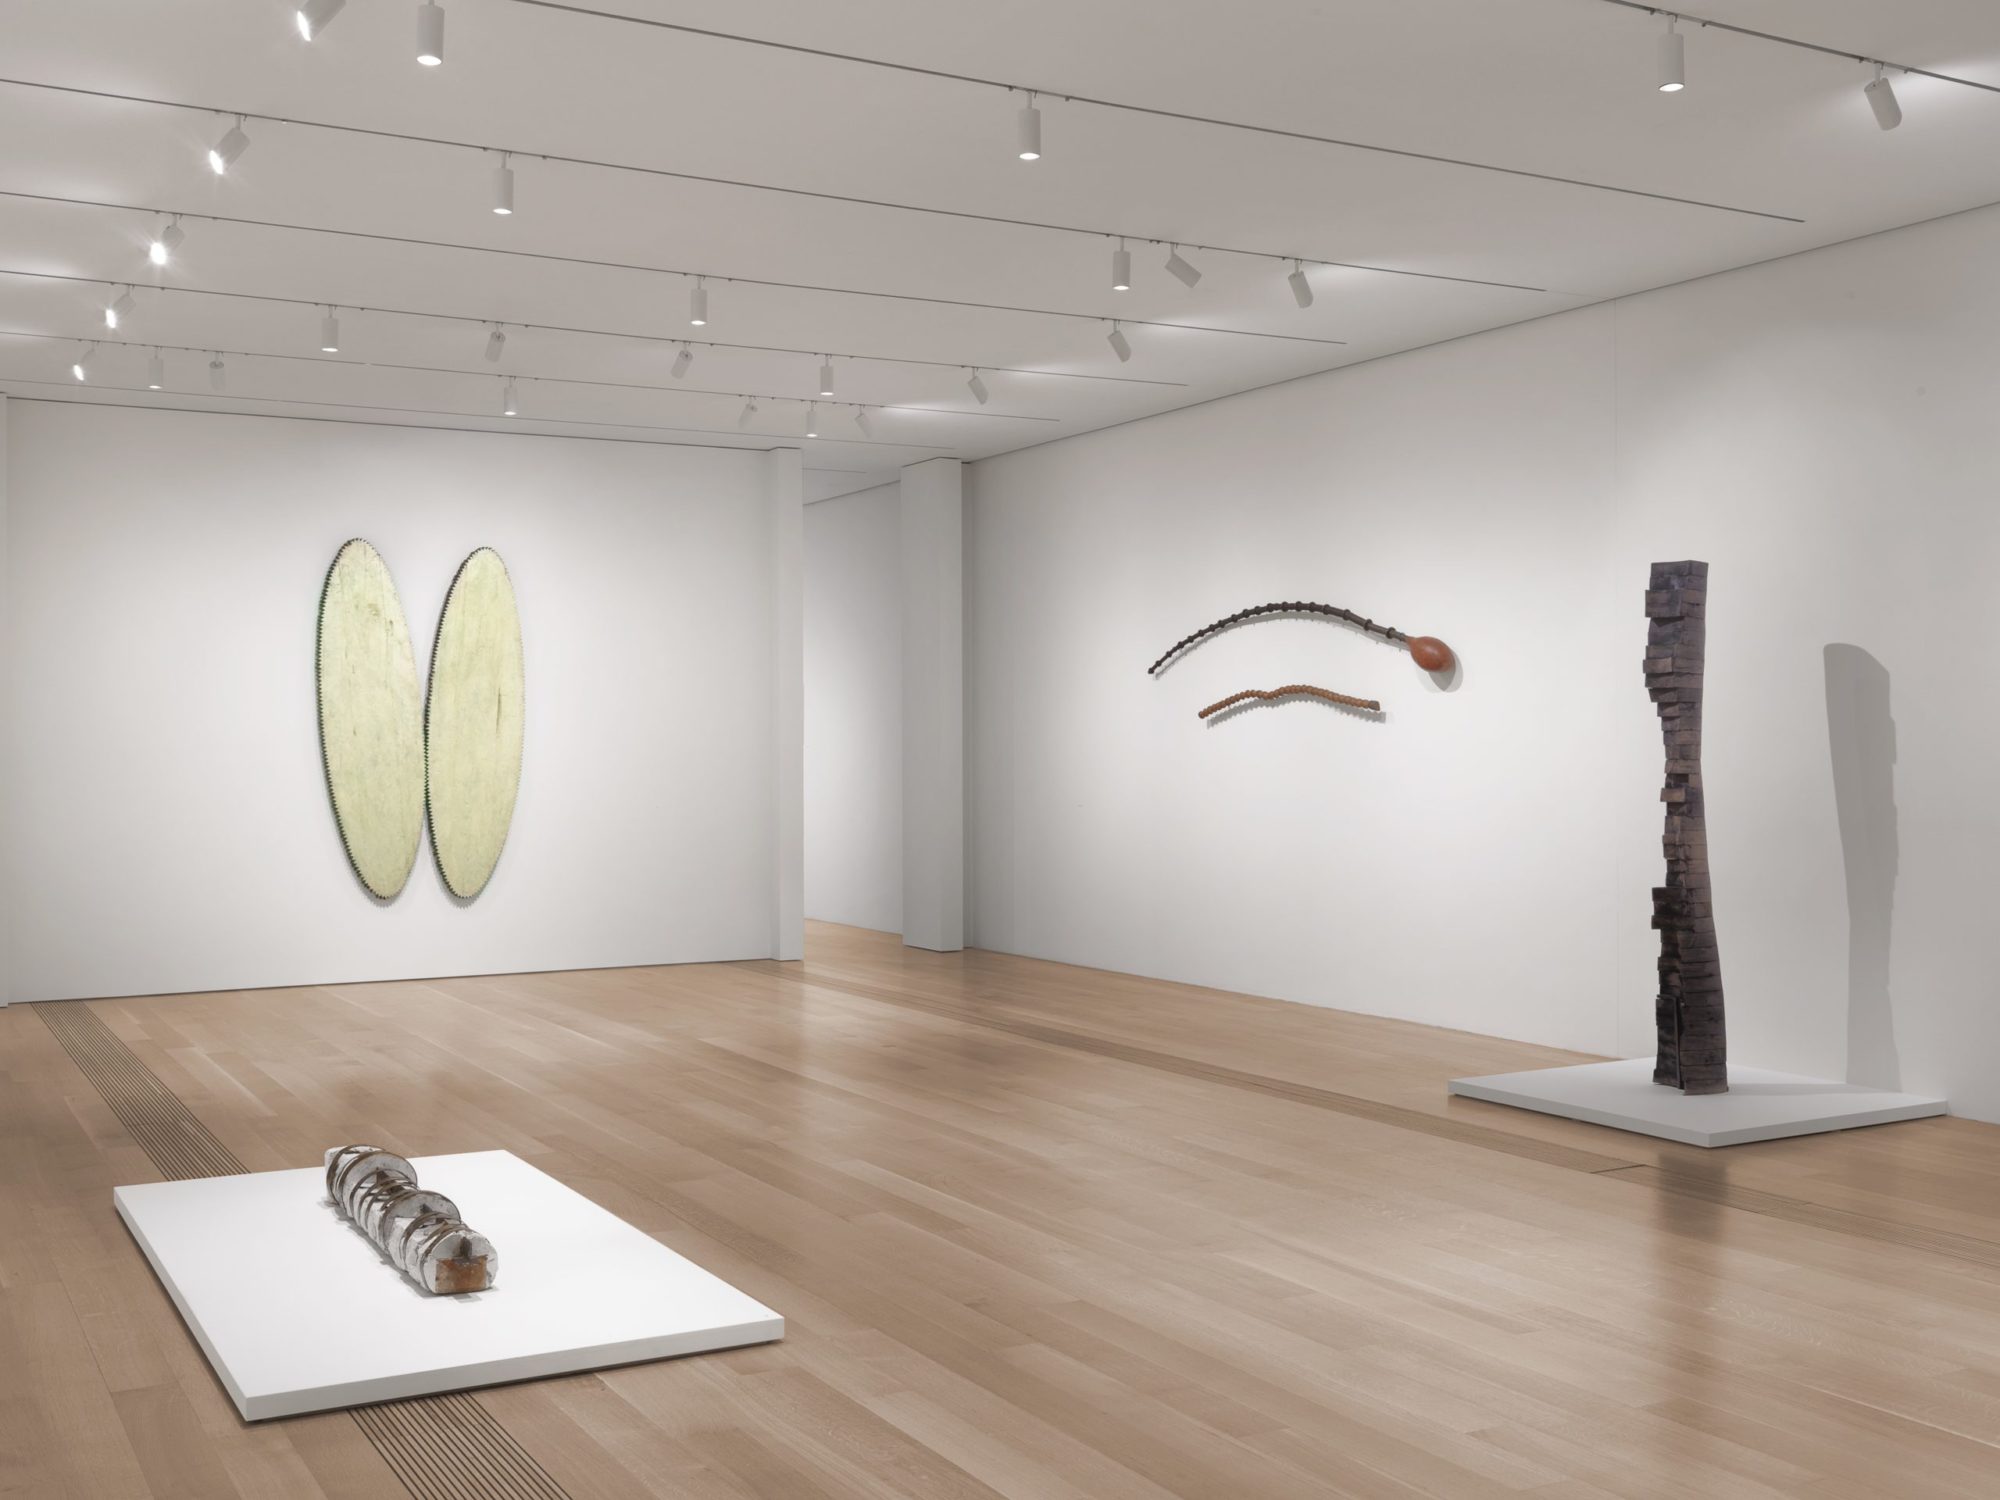 On a white podium in the middle of a wooden gallery floor which shows a row of circular pieces of wood covered in metal and light pigment. On the wall behind this sculpture is a pair of cream white oval shaped 